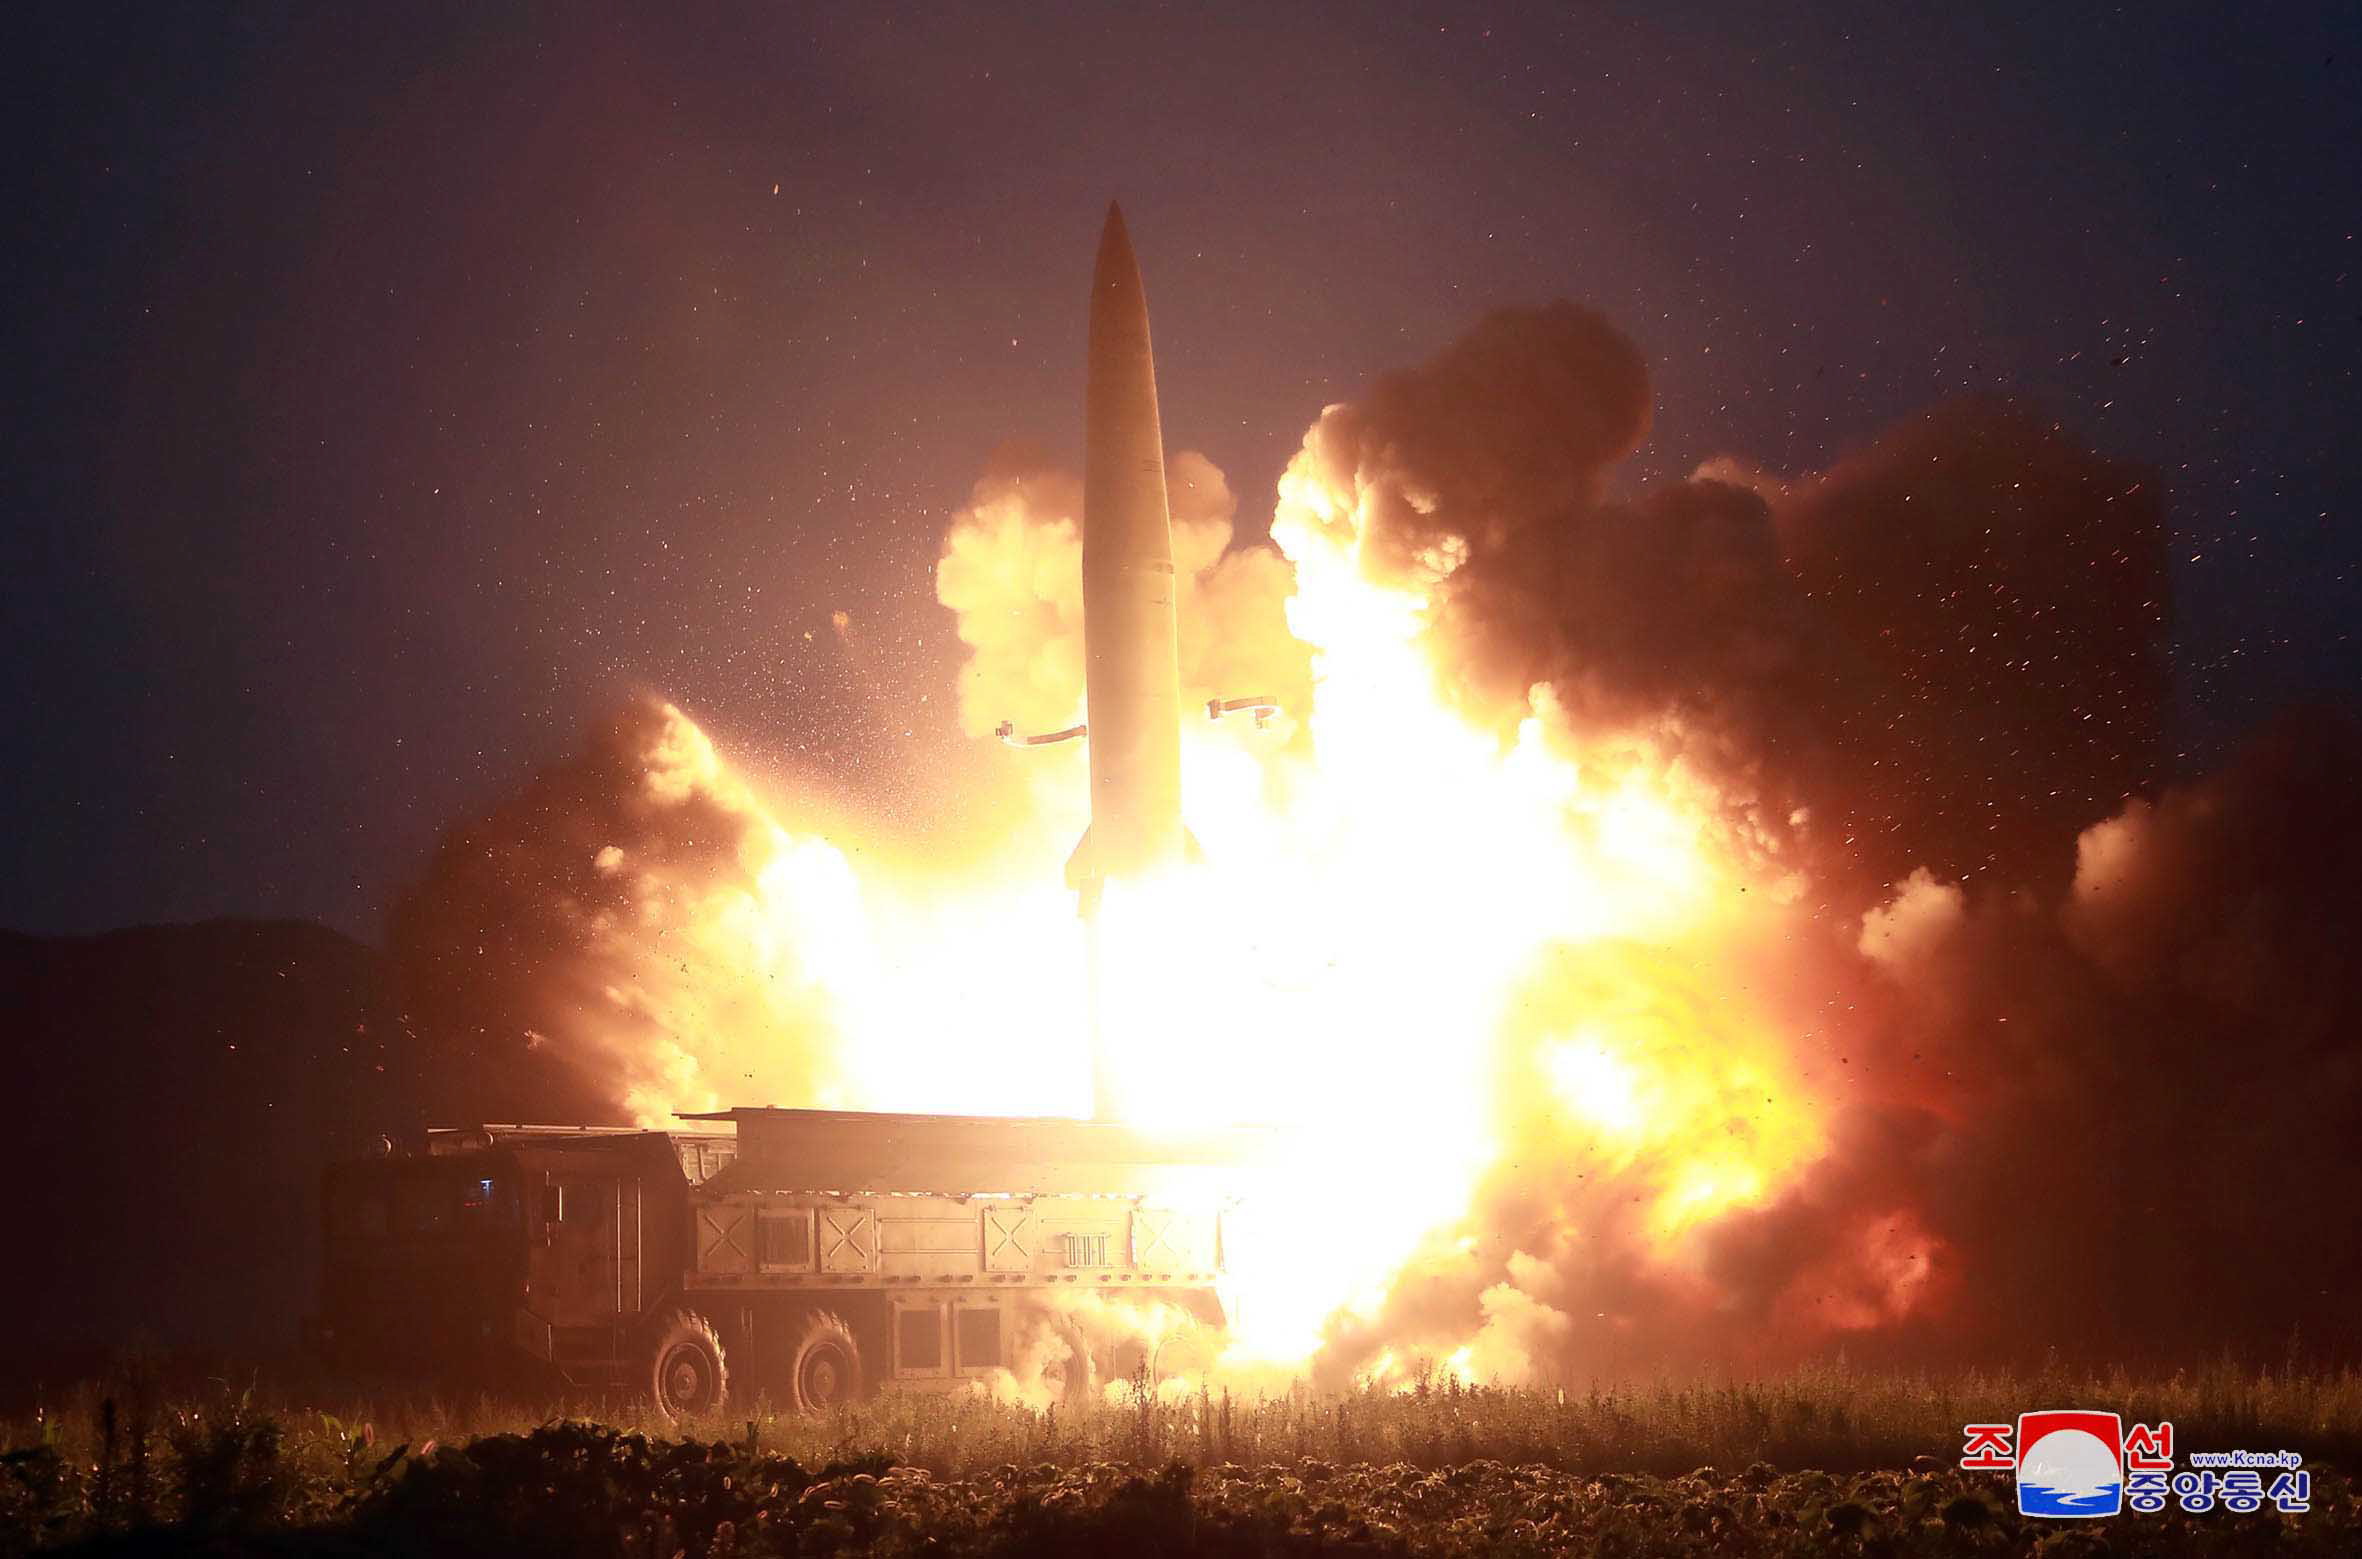 epa07759829 A photo released by the official North Korean Central News Agency (KCNA) shows the demonstration fire of a new-type of tactical guided missile from an undisclosed location in North Korea, 06 August 2019 (issued 07 August 2019).  EPA/KCNA   EDITORIAL USE ONLY  EDITORIAL USE ONLY